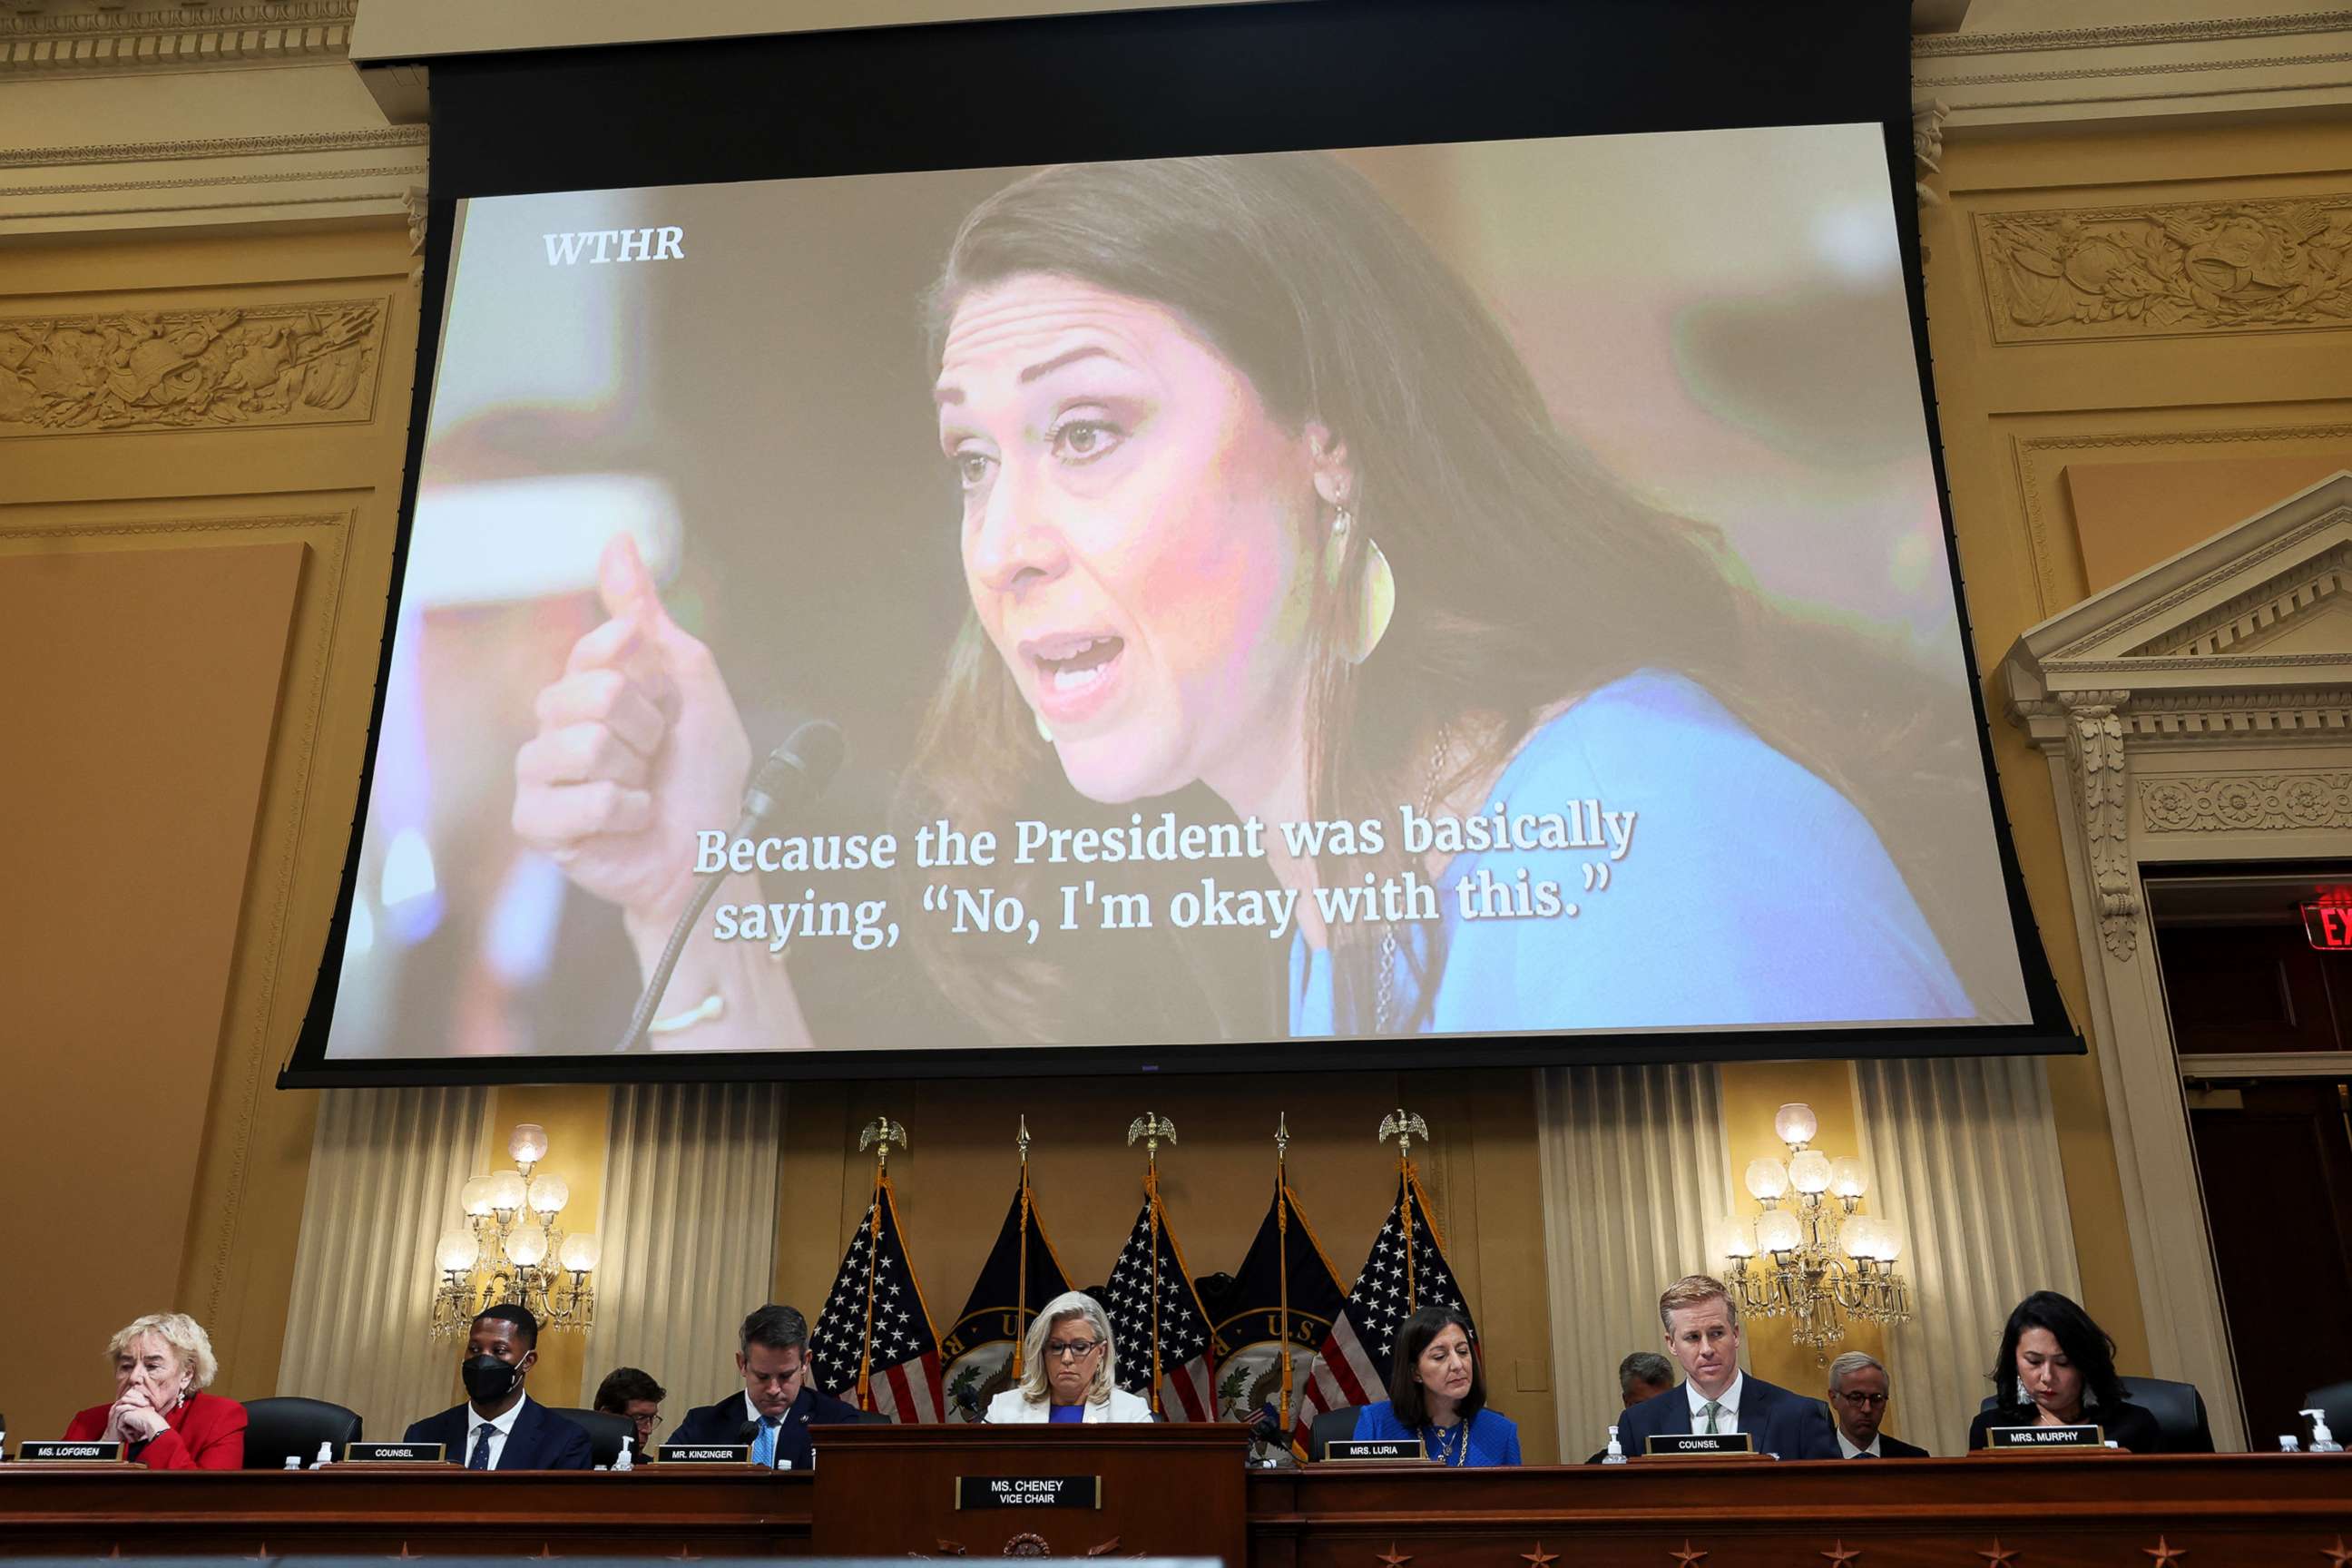 PHOTO: U.S. Representative Jaime Herrera Beutler appears on a screen during a public hearing of the U.S. House Select Committee to investigate the January 6 Attack on the U.S. Capitol, in Washington, July 21, 2022.